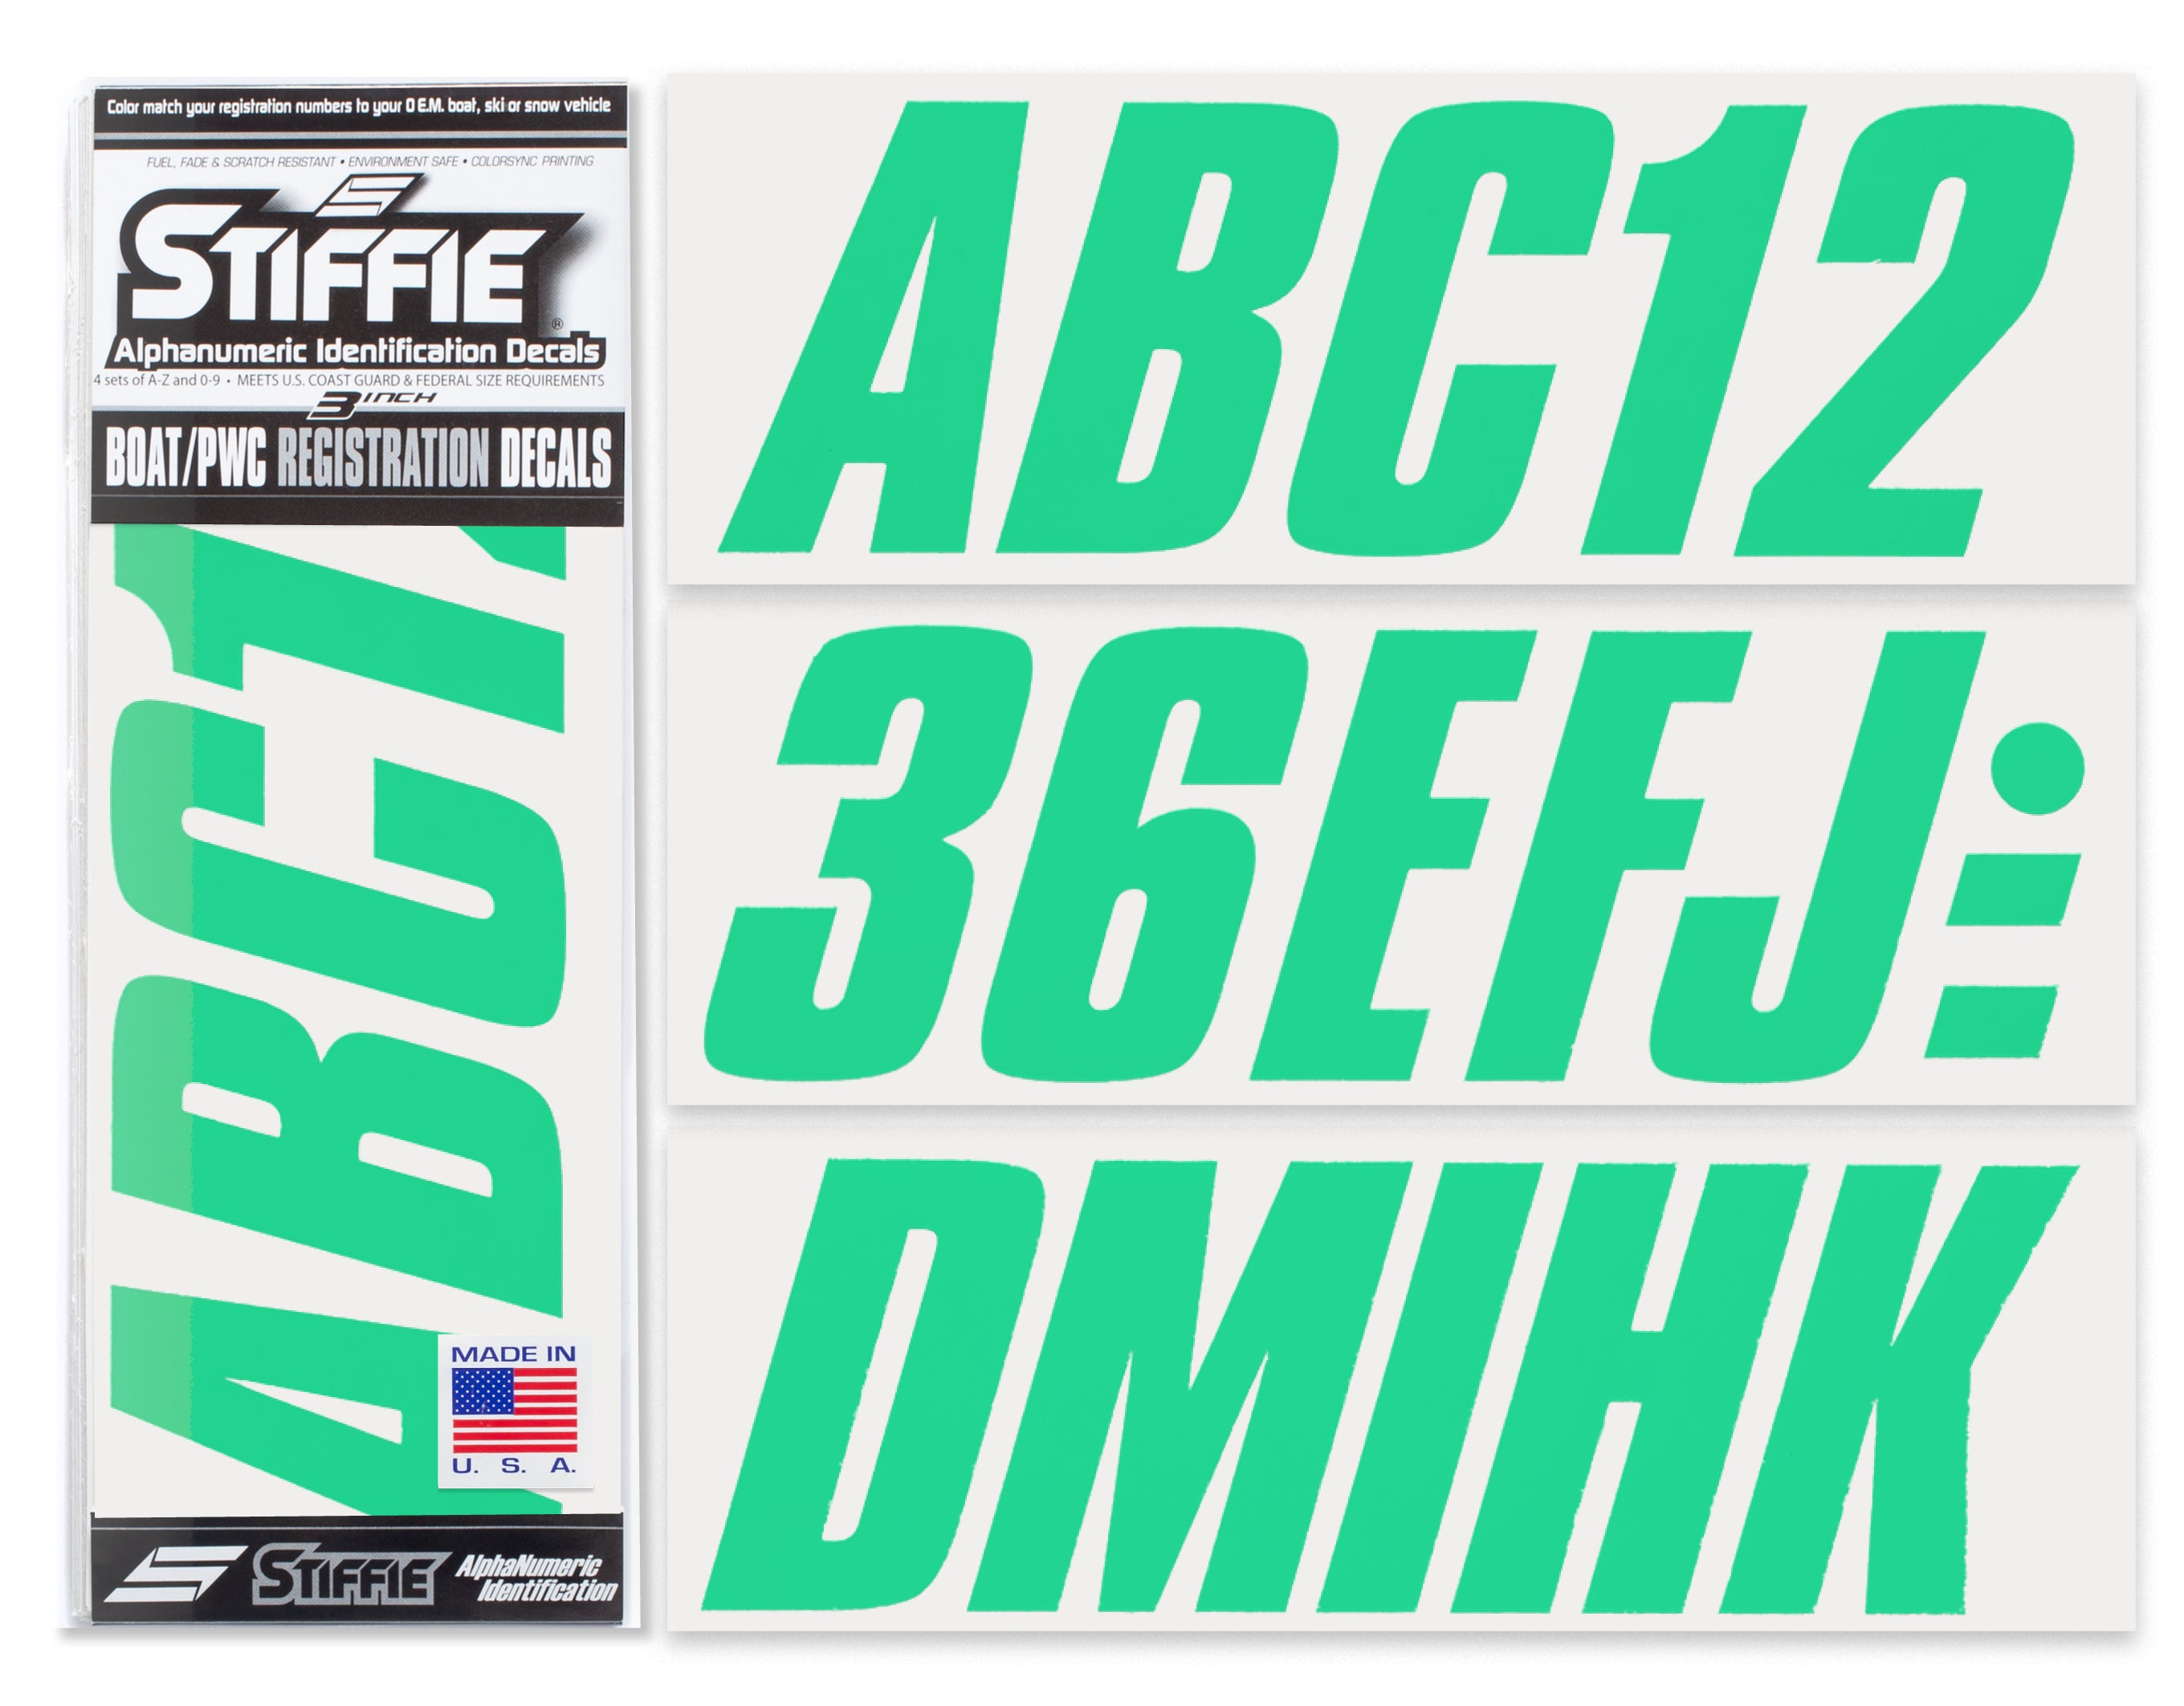 STIFFIE Shift Sea Foam Green 3" ID Kit Alpha-Numeric Registration Identification Numbers Stickers Decals for Boats & Personal Watercraft